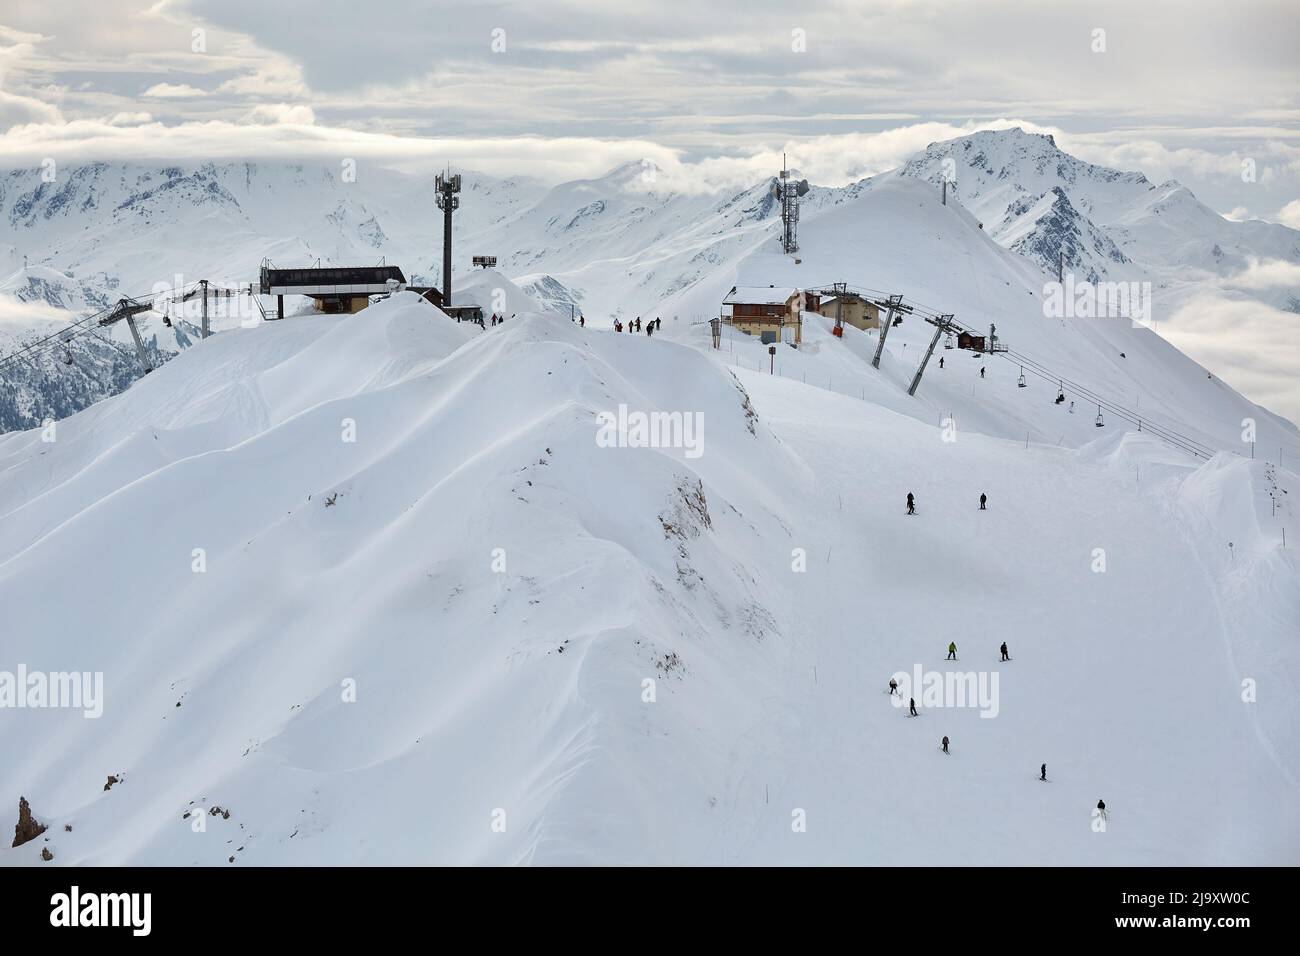 Skiing slopes from the top Stock Photo